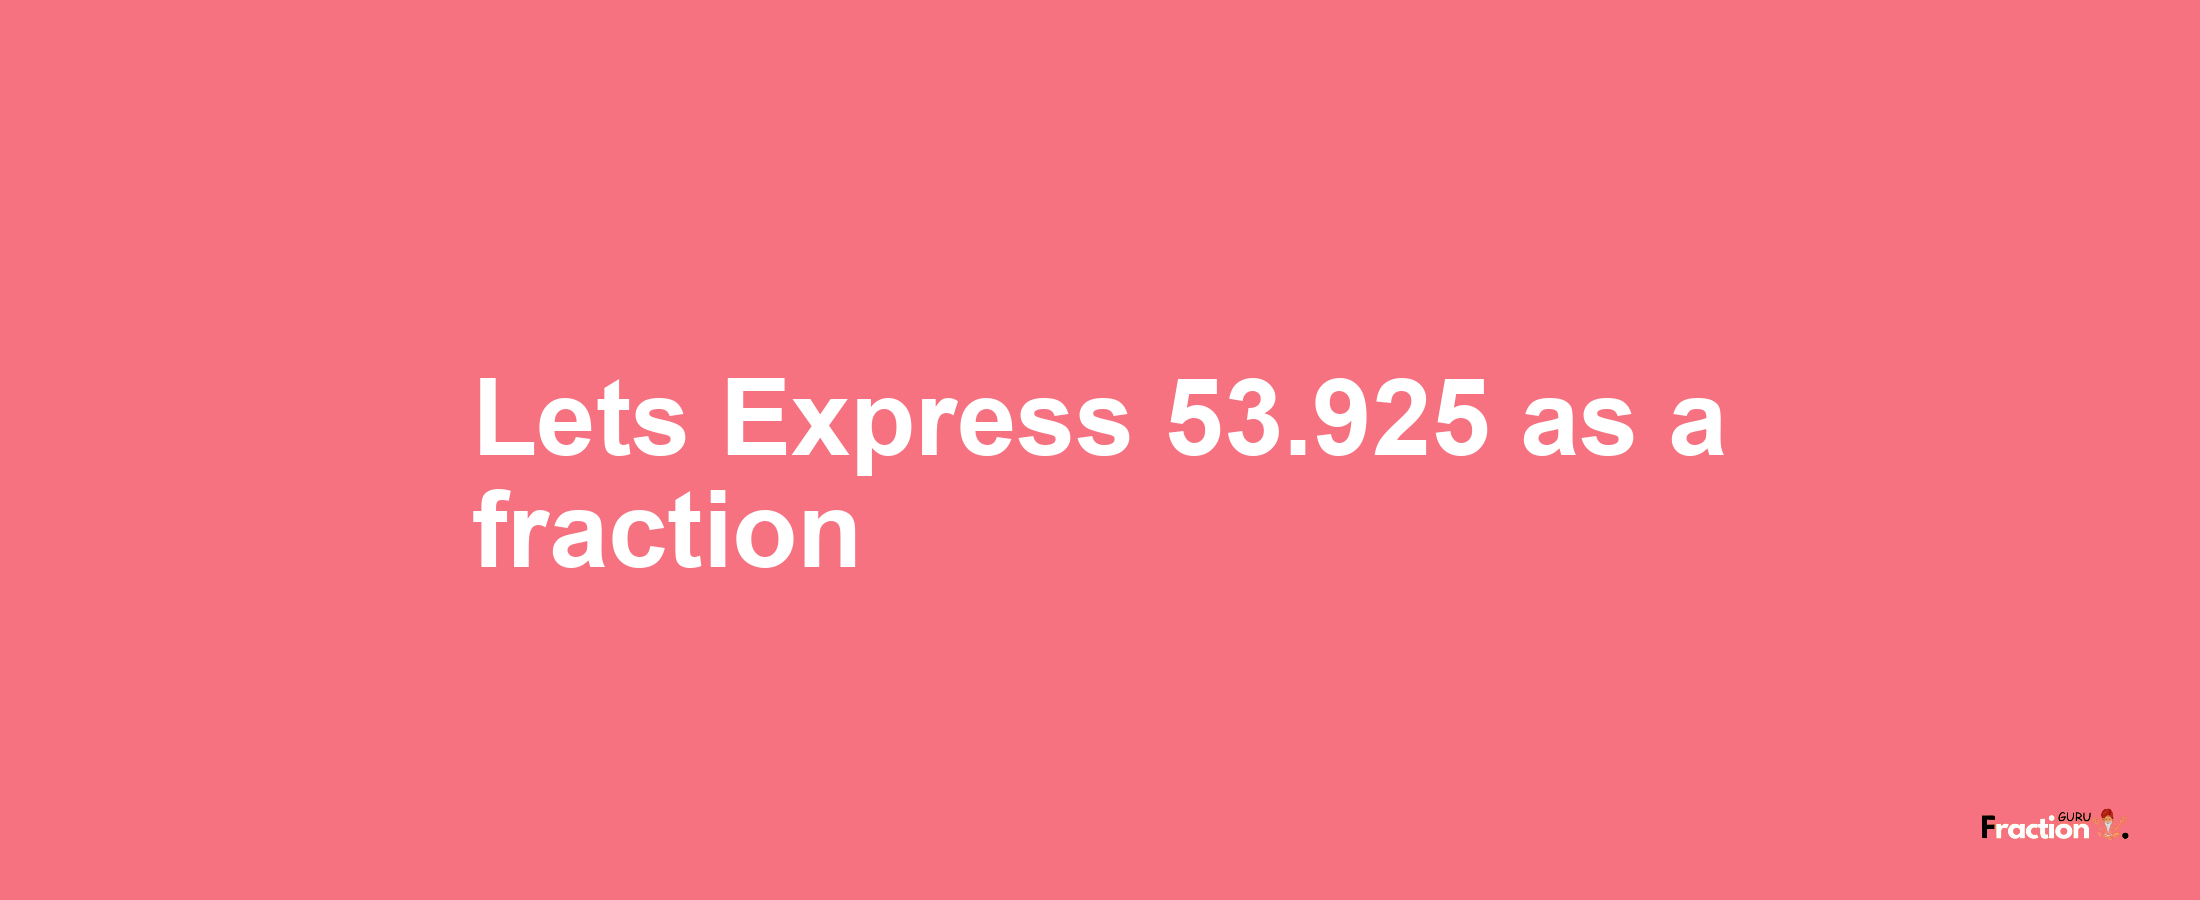 Lets Express 53.925 as afraction